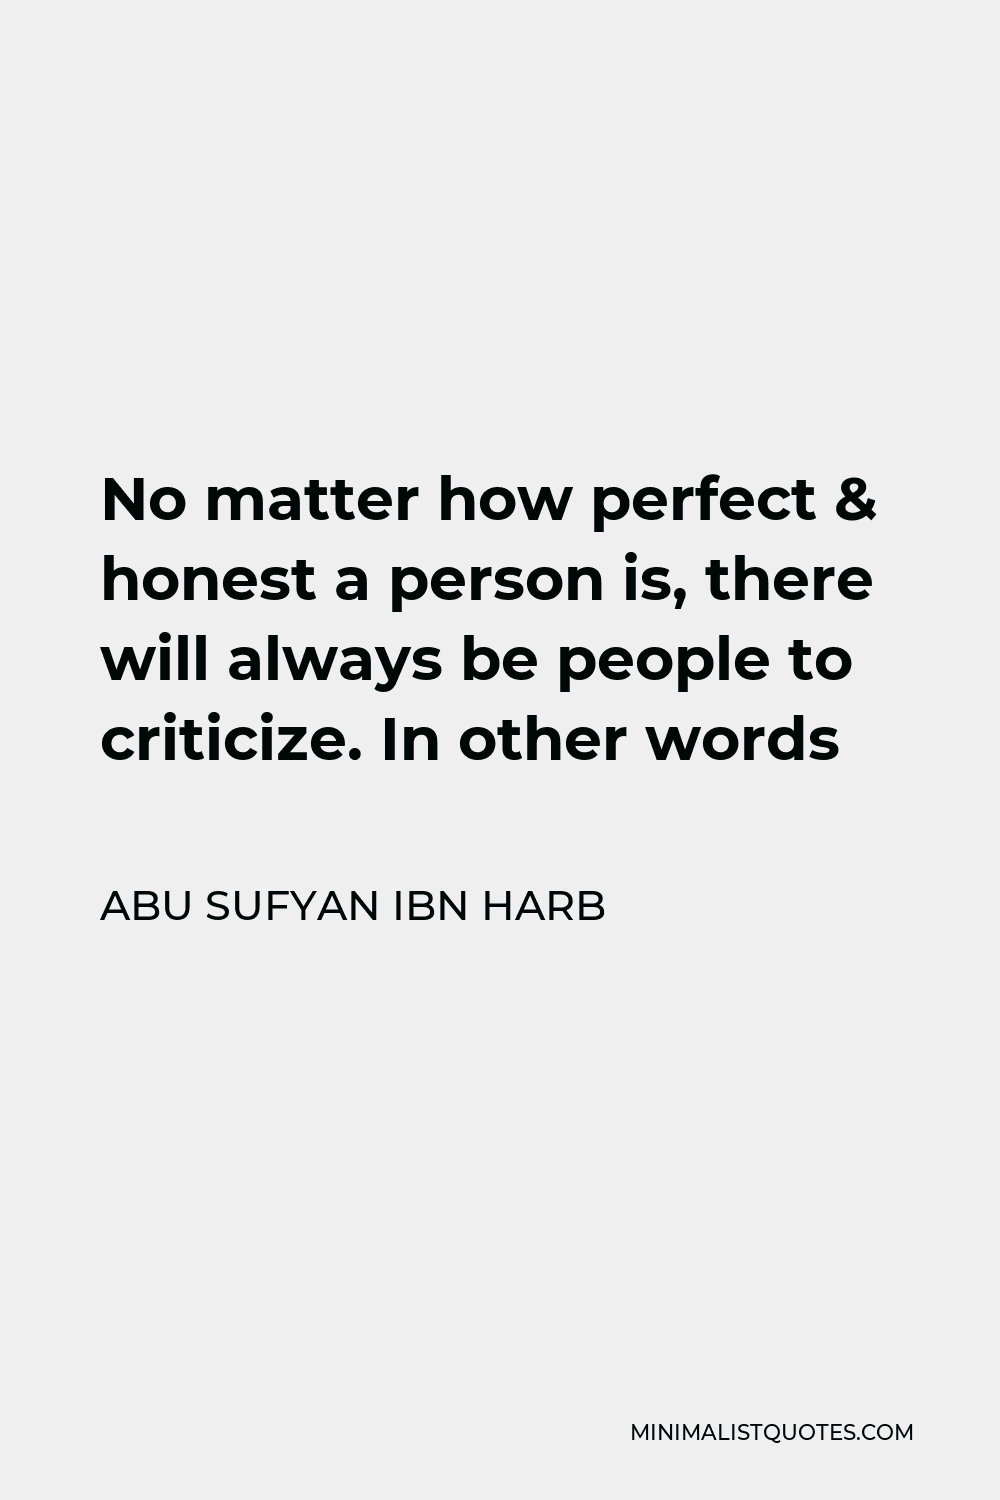 Abu Sufyan ibn Harb Quote - No matter how perfect & honest a person is, there will always be people to criticize. In other words